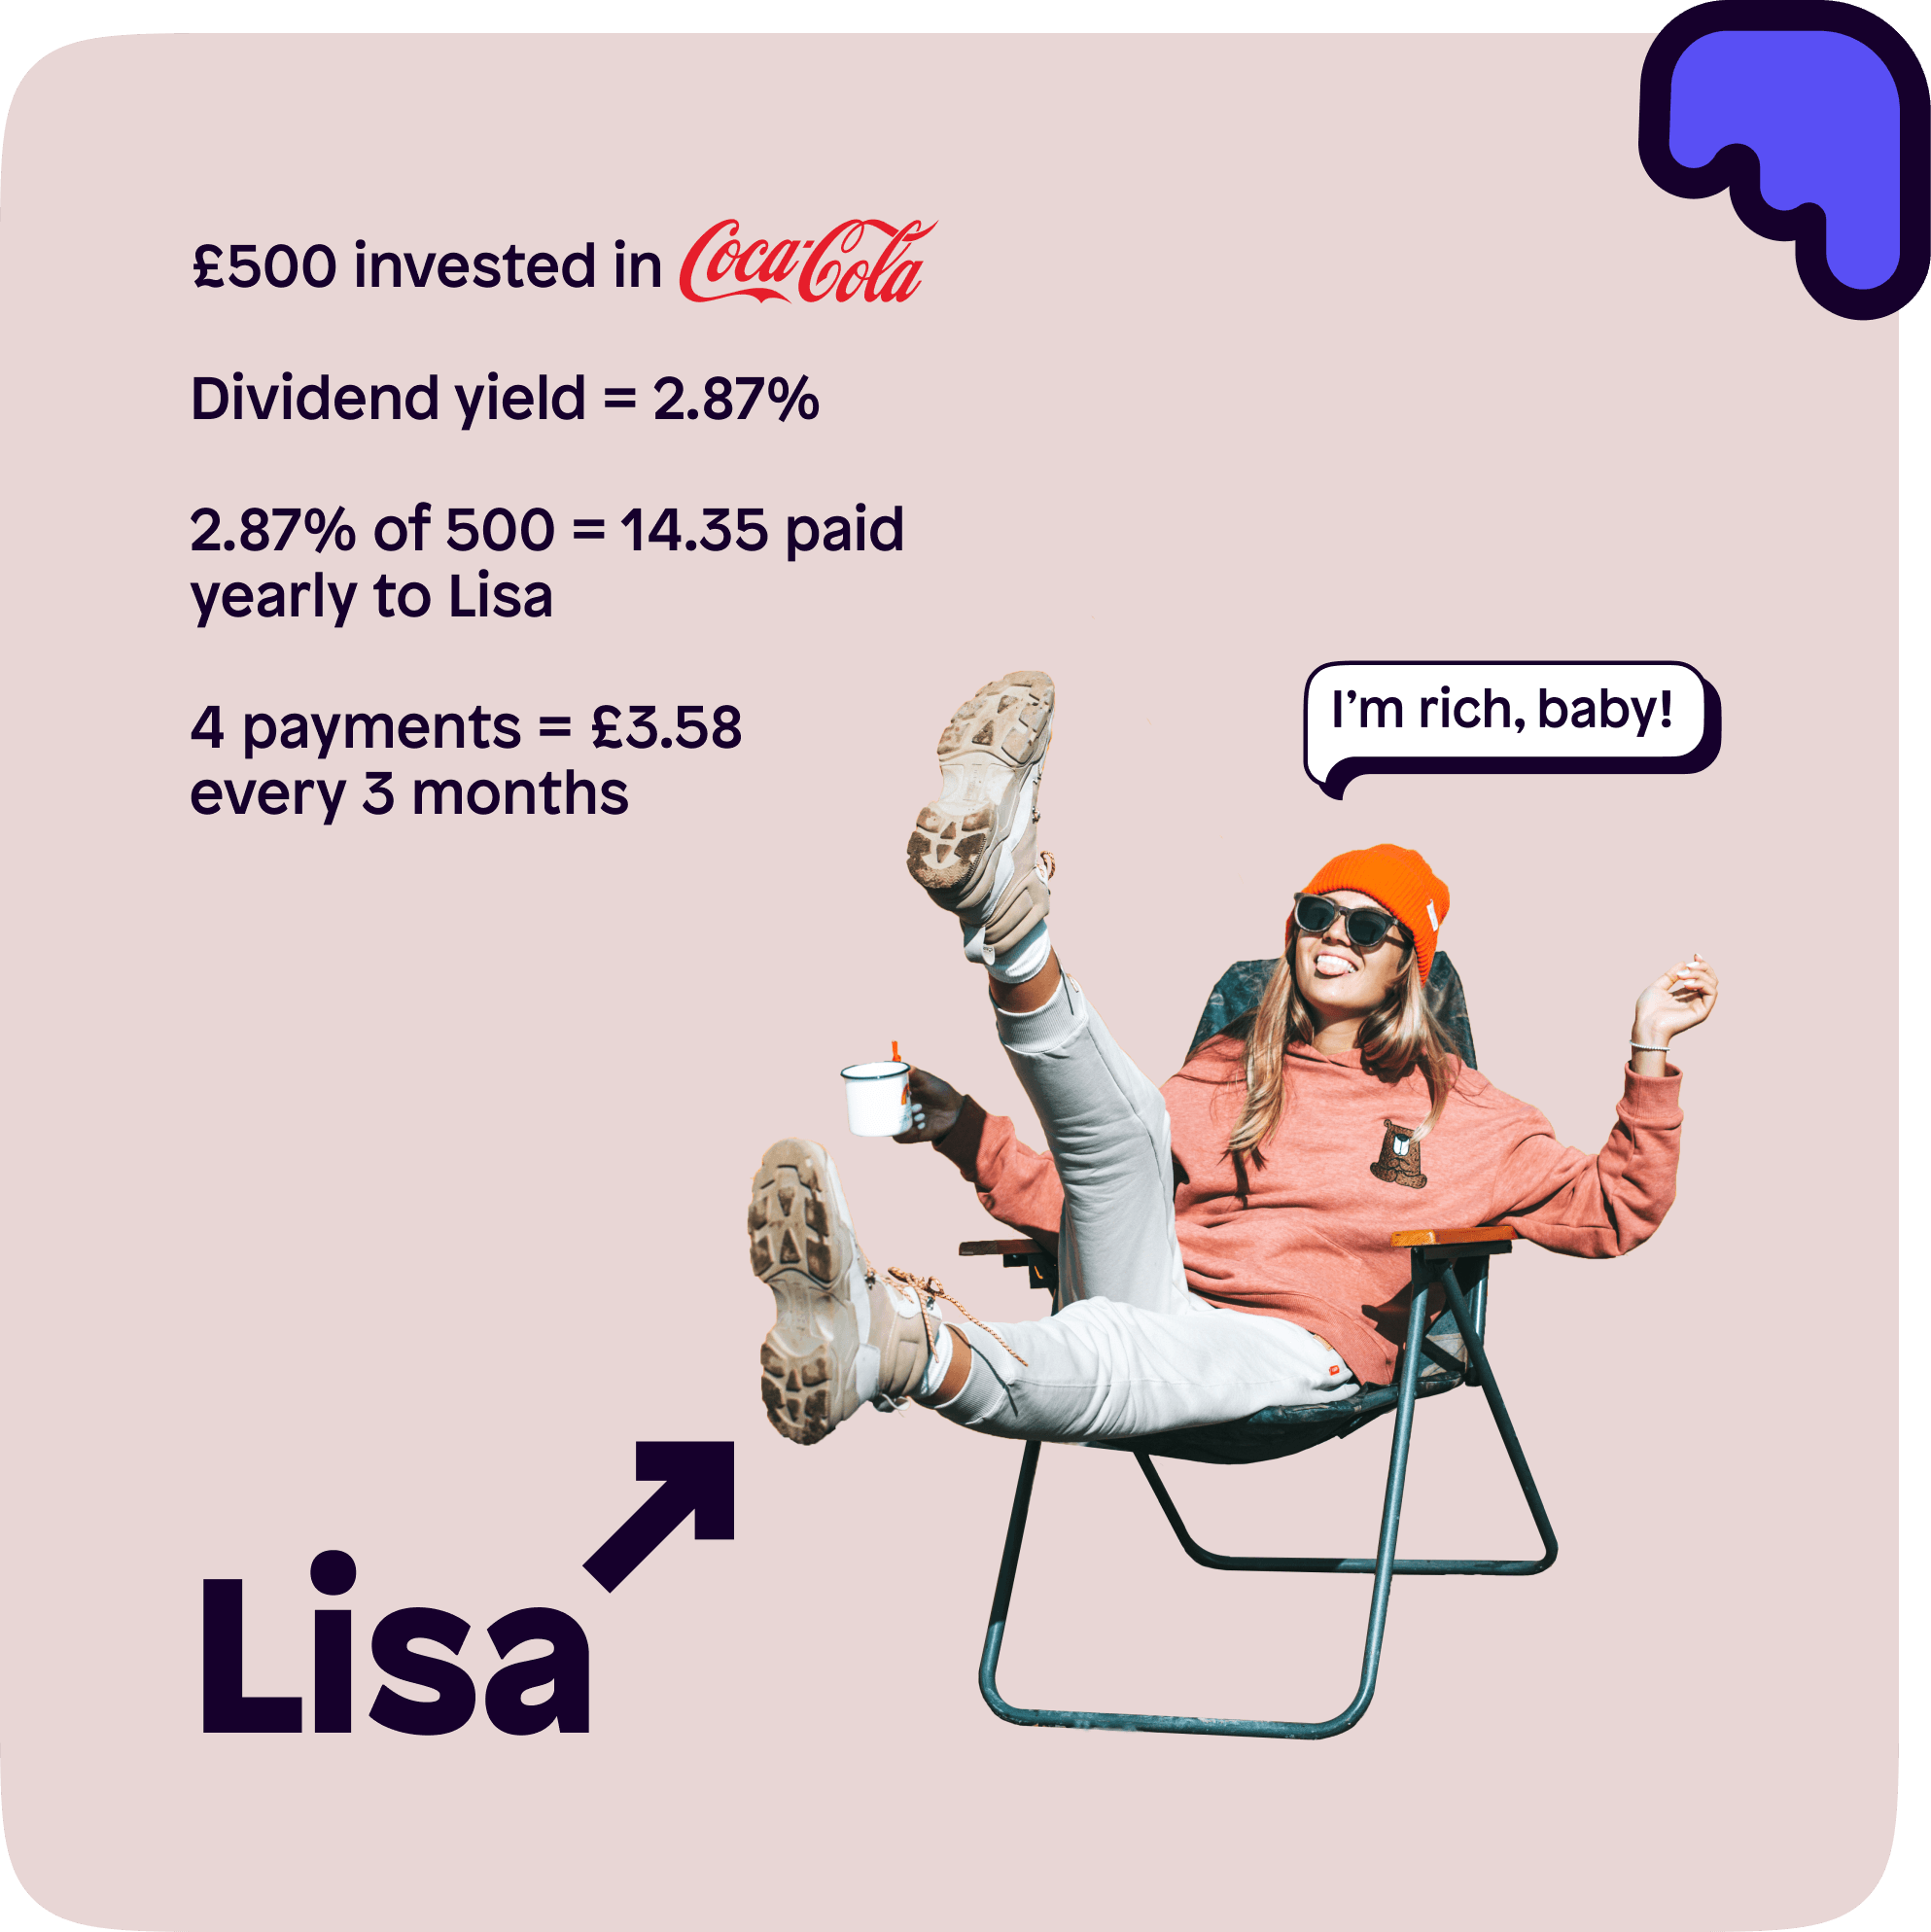 An example of a Coca-Cola dividend payment made to a woman called Lisa